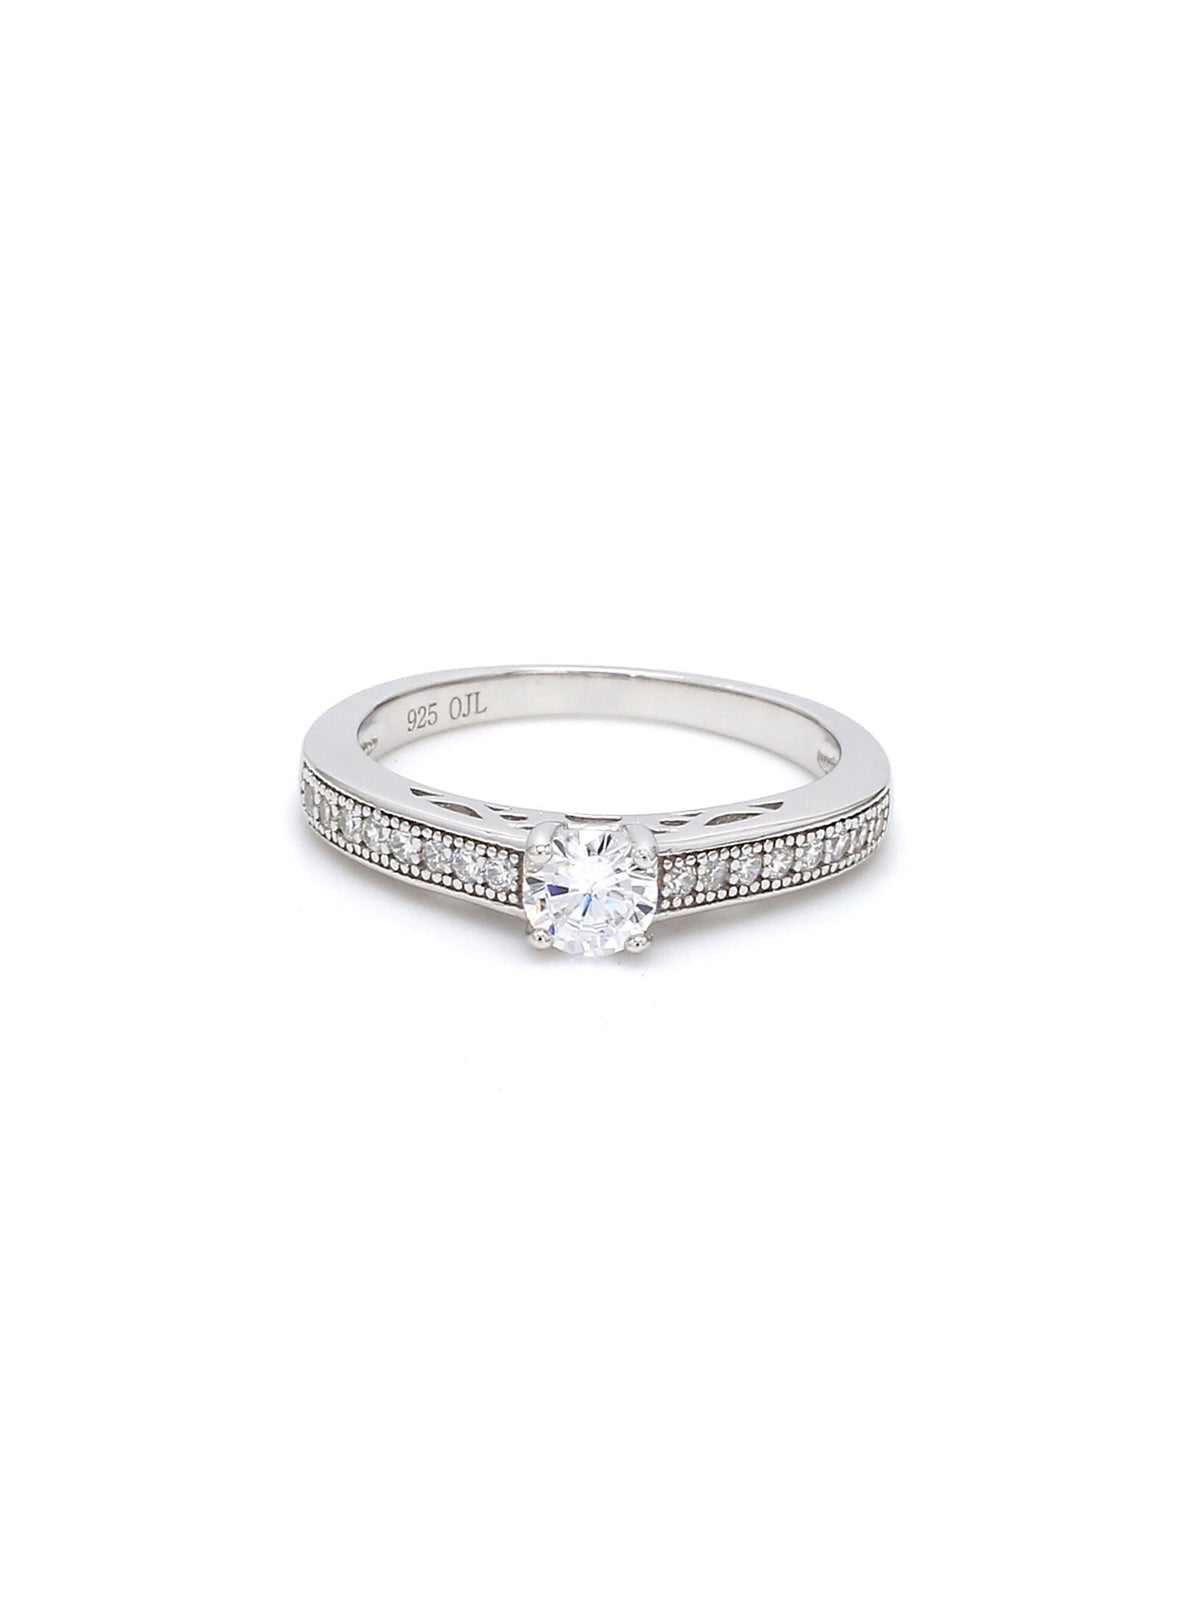 SINGLE SOLITAIRE RING FOR HER-1